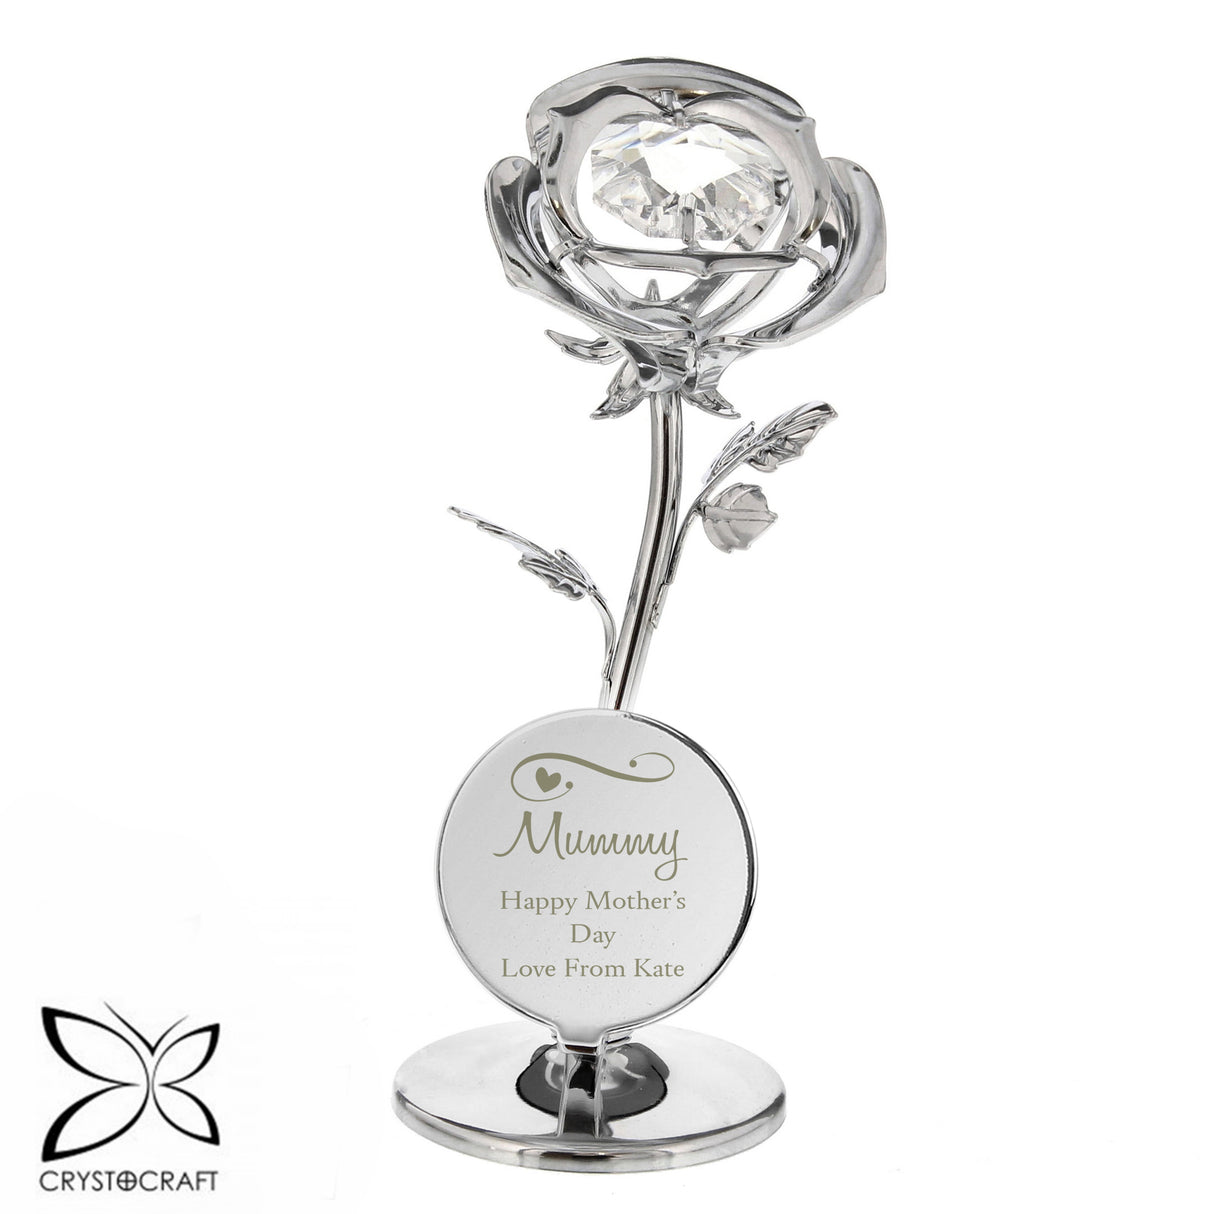 Swirls & Hearts Crystocraft Rose Ornament - Gift Moments